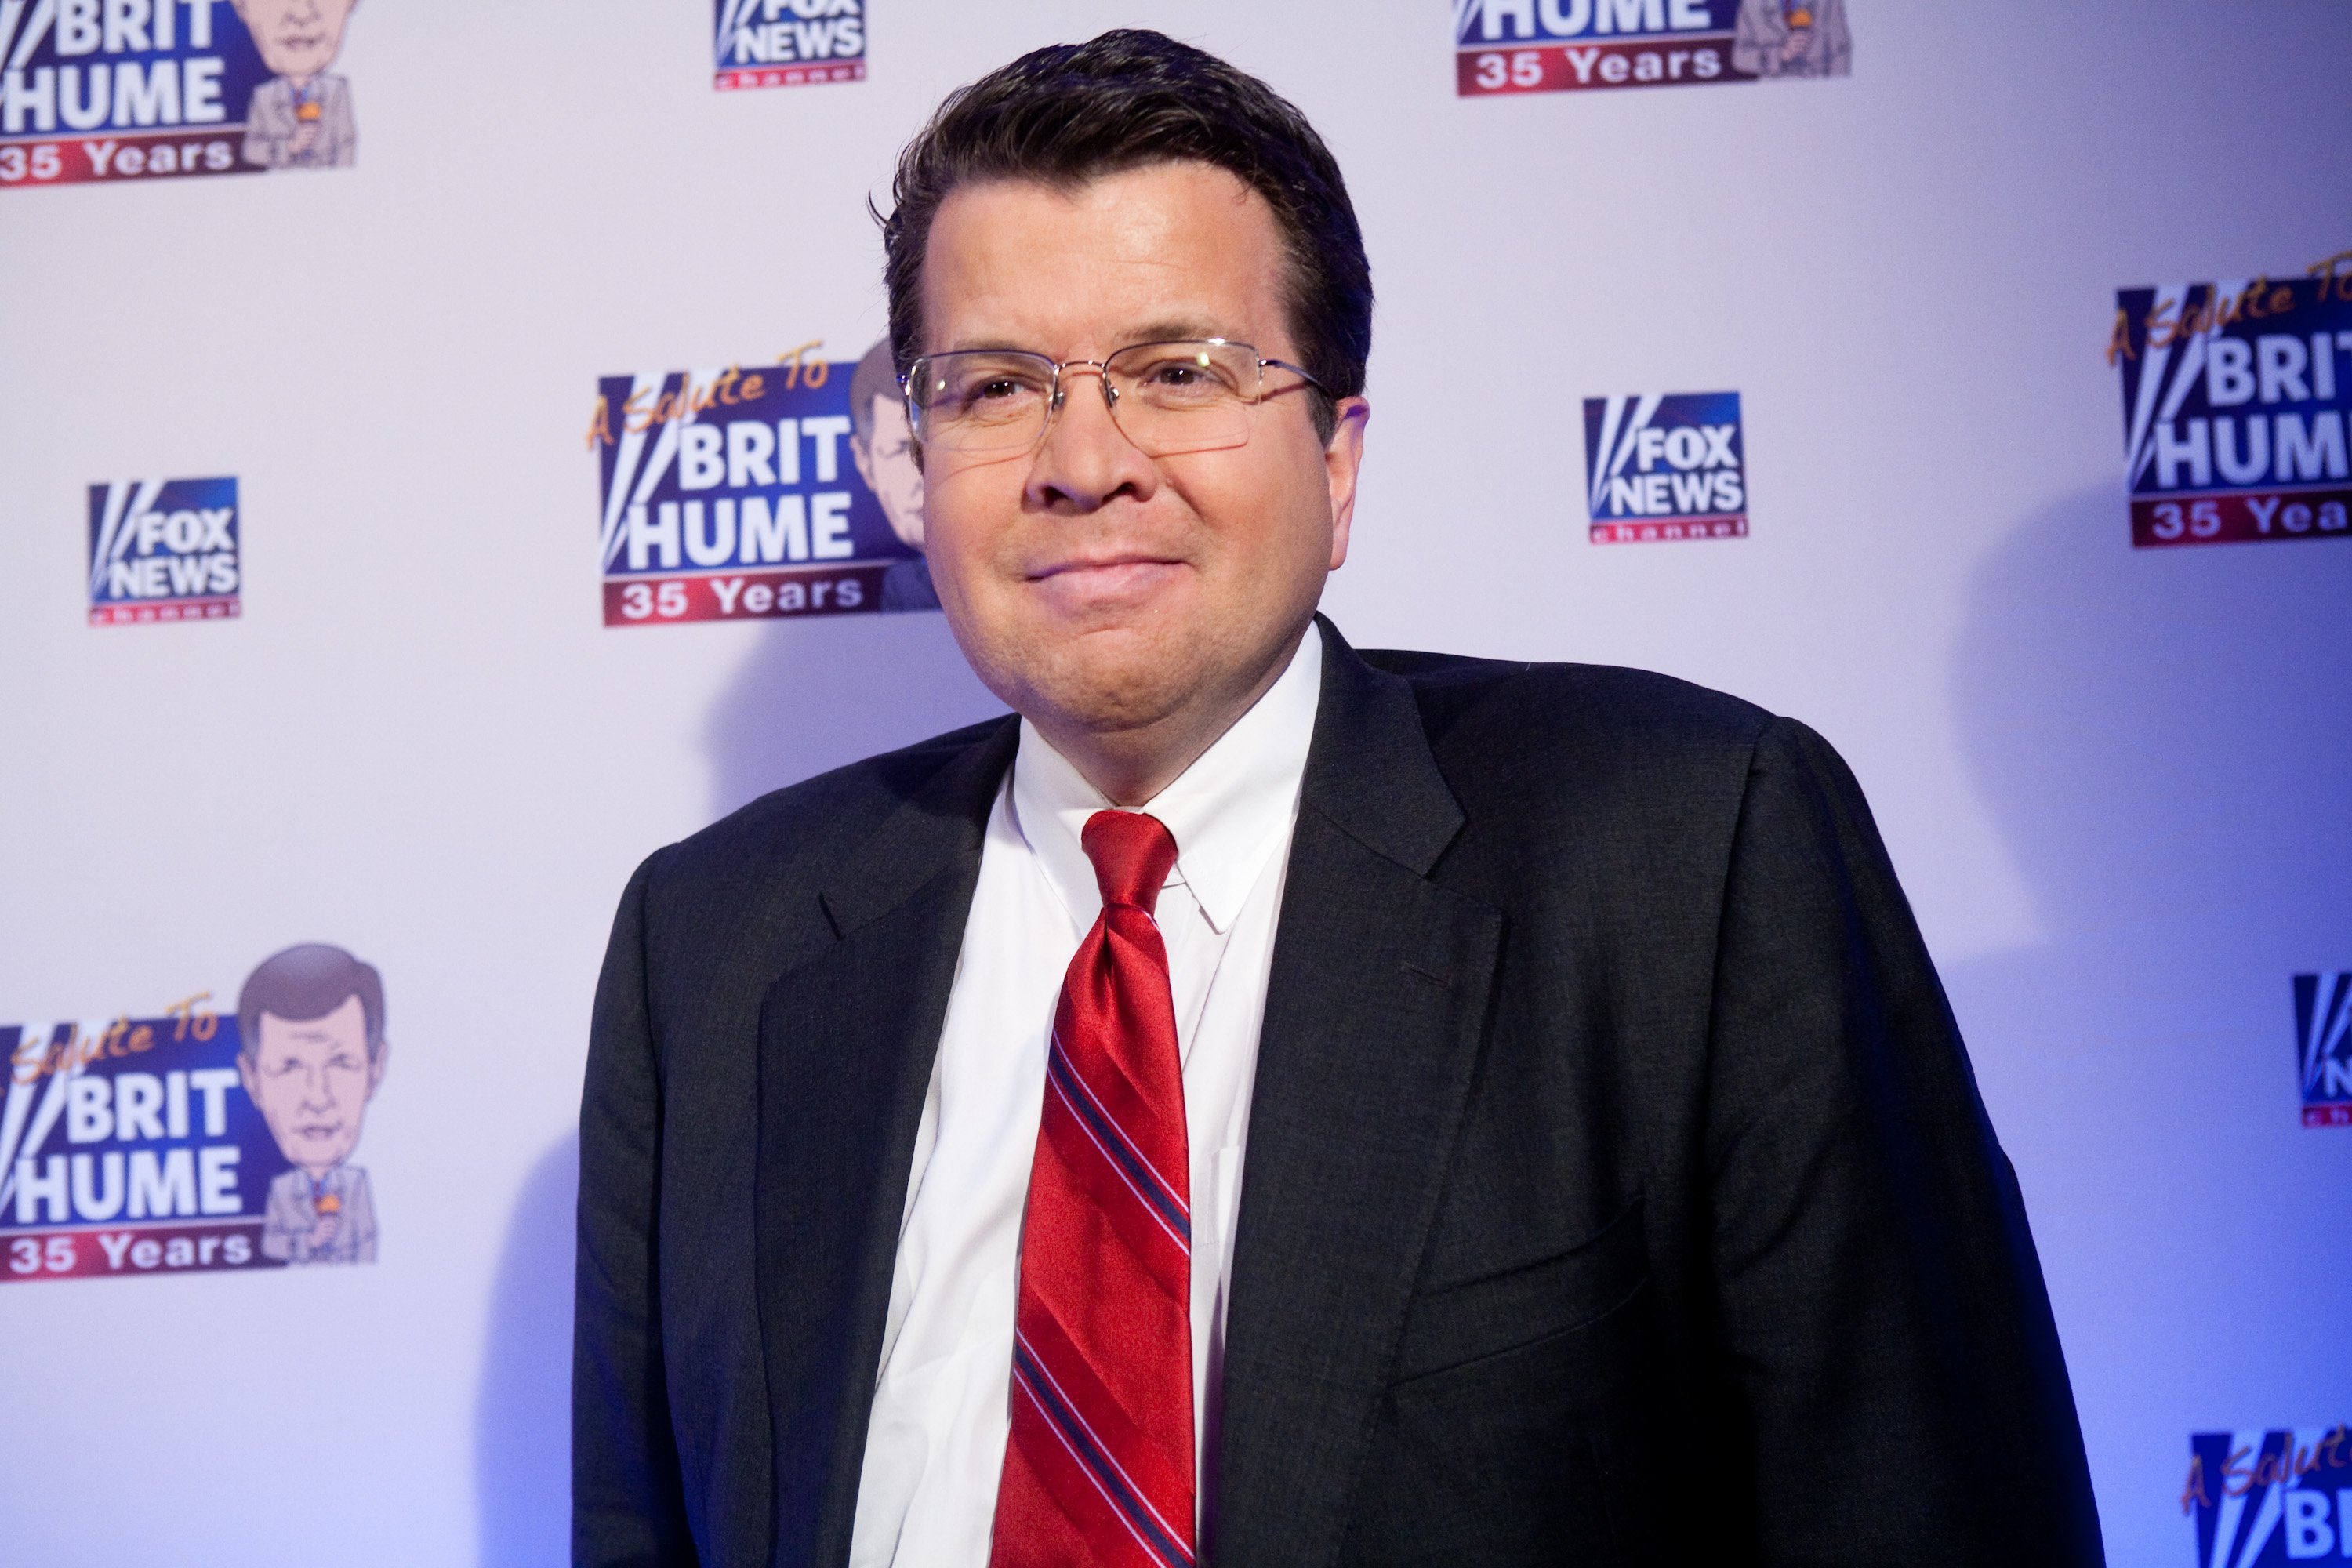 FOX News host Neil Cavuto poses on the red carpet upon arrival at a salute to FOX News Channel's Brit Hume on January 8, 2009 in Washington, DC. | Photo: Getty Images